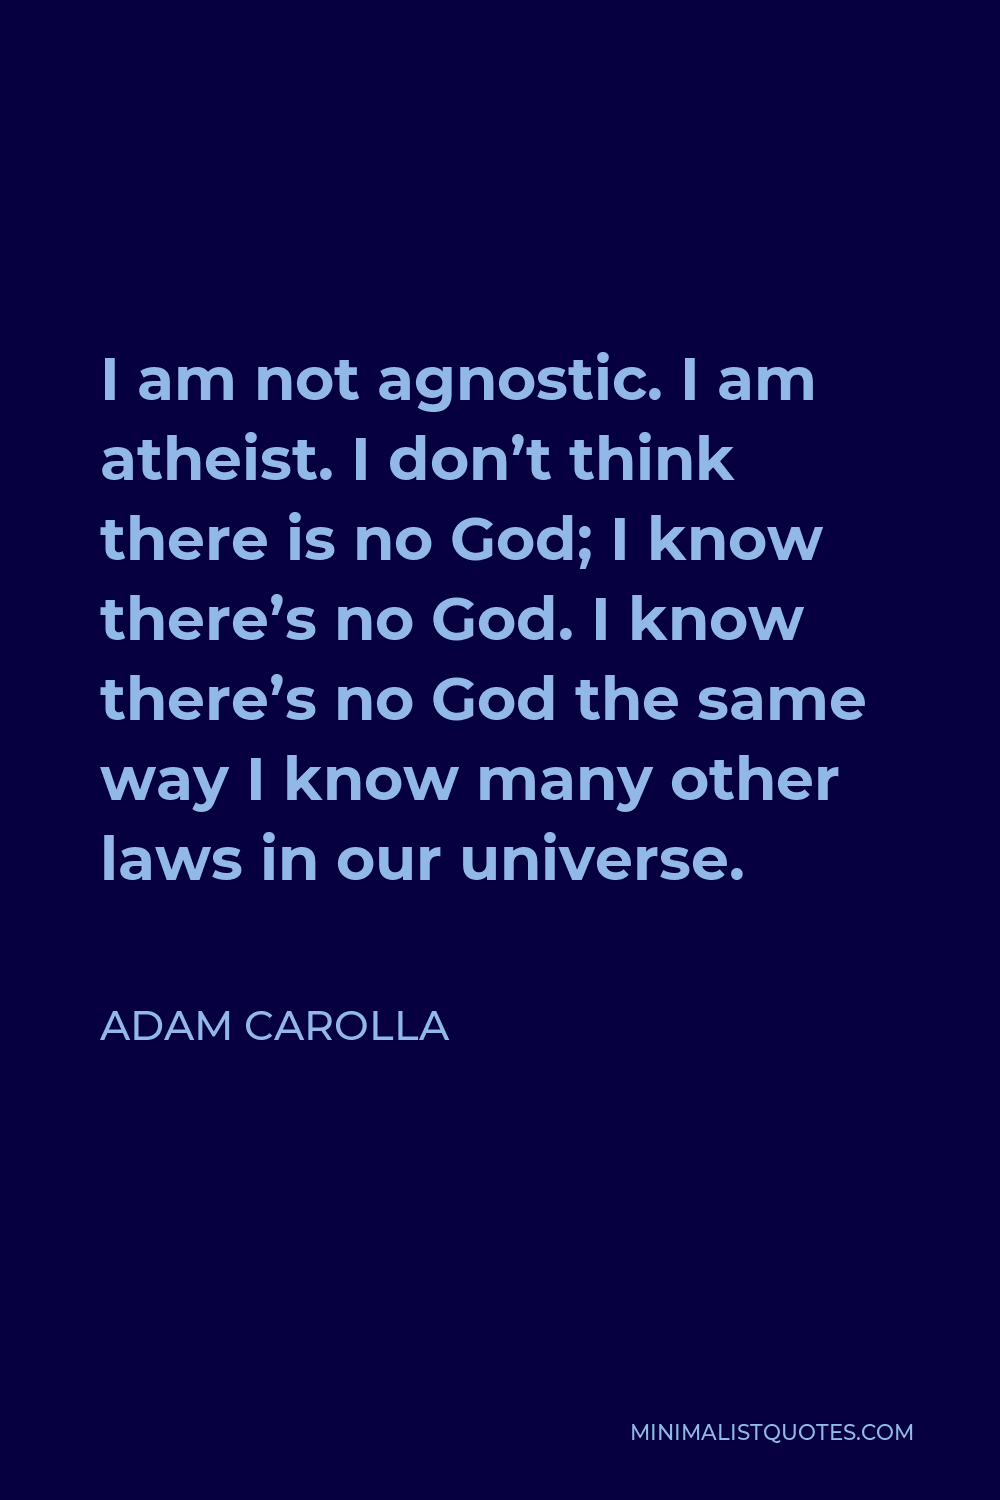 Adam Carolla Quote - I am not agnostic. I am atheist. I don’t think there is no God; I know there’s no God. I know there’s no God the same way I know many other laws in our universe.